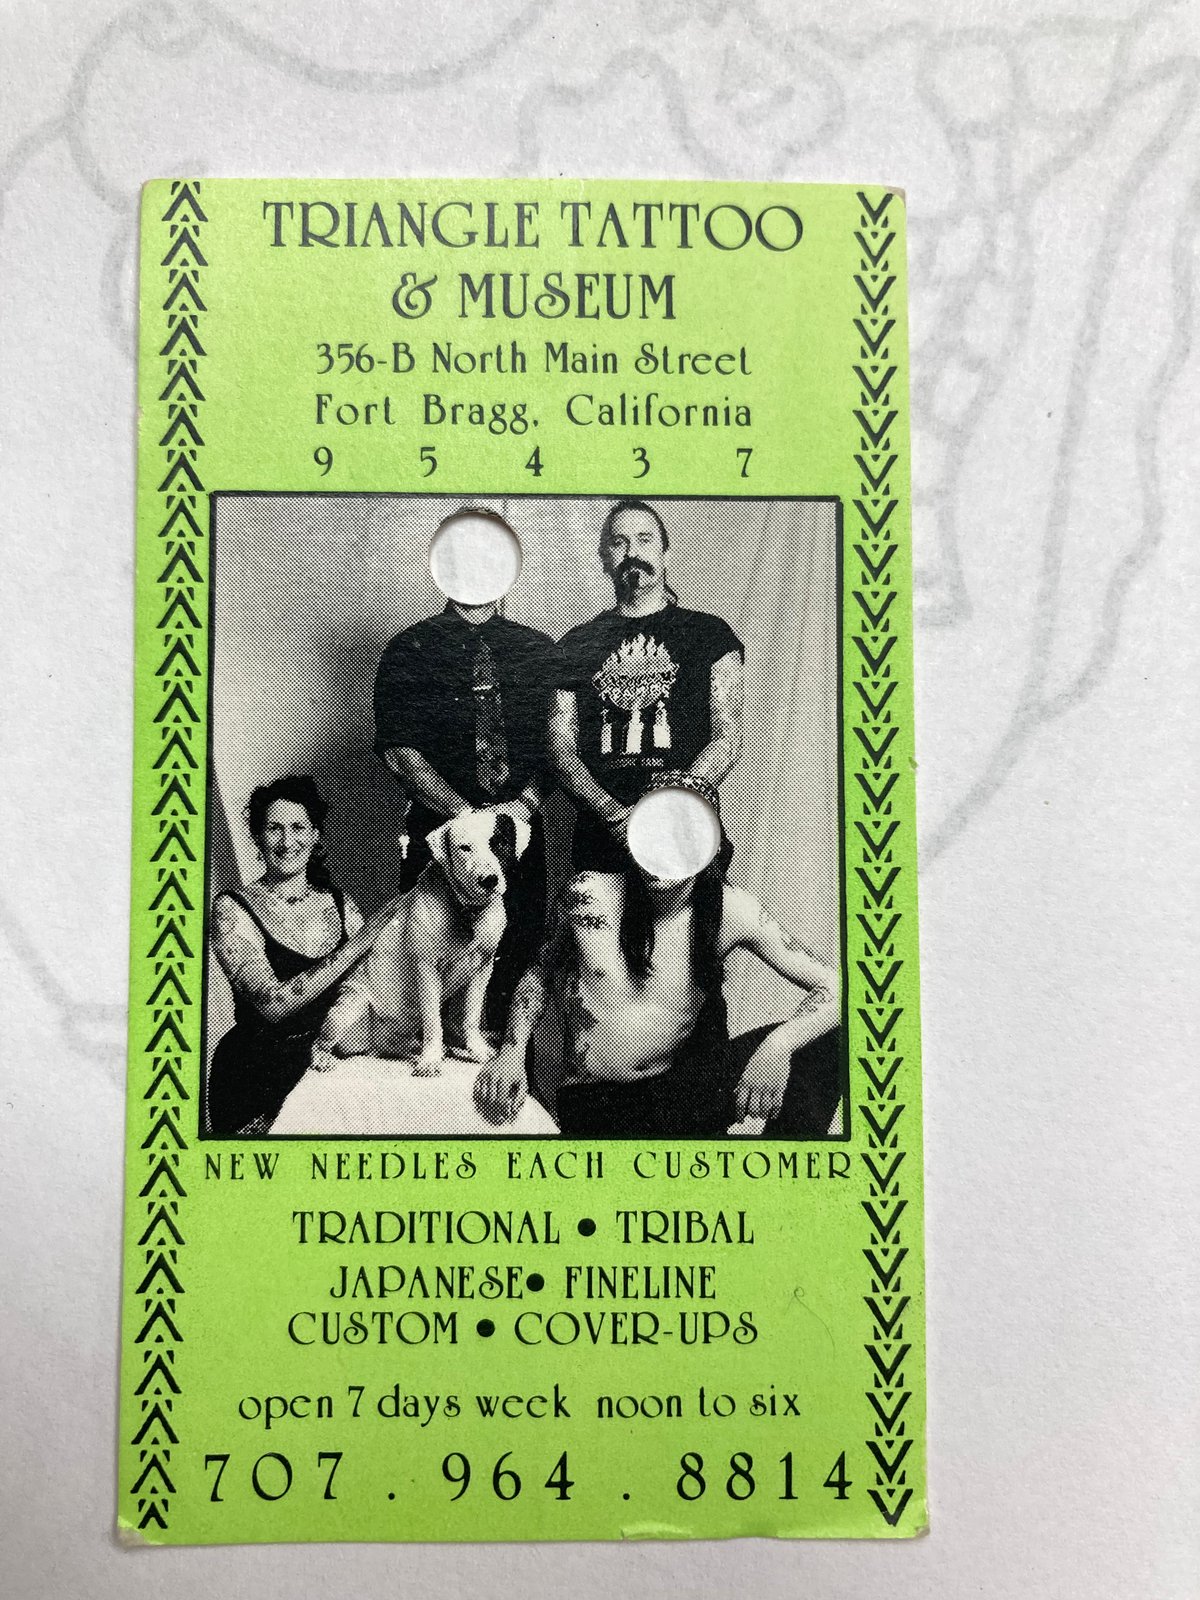 World Famous Triangle Tattoo  Museum  101 Things To Do in Mendocino County